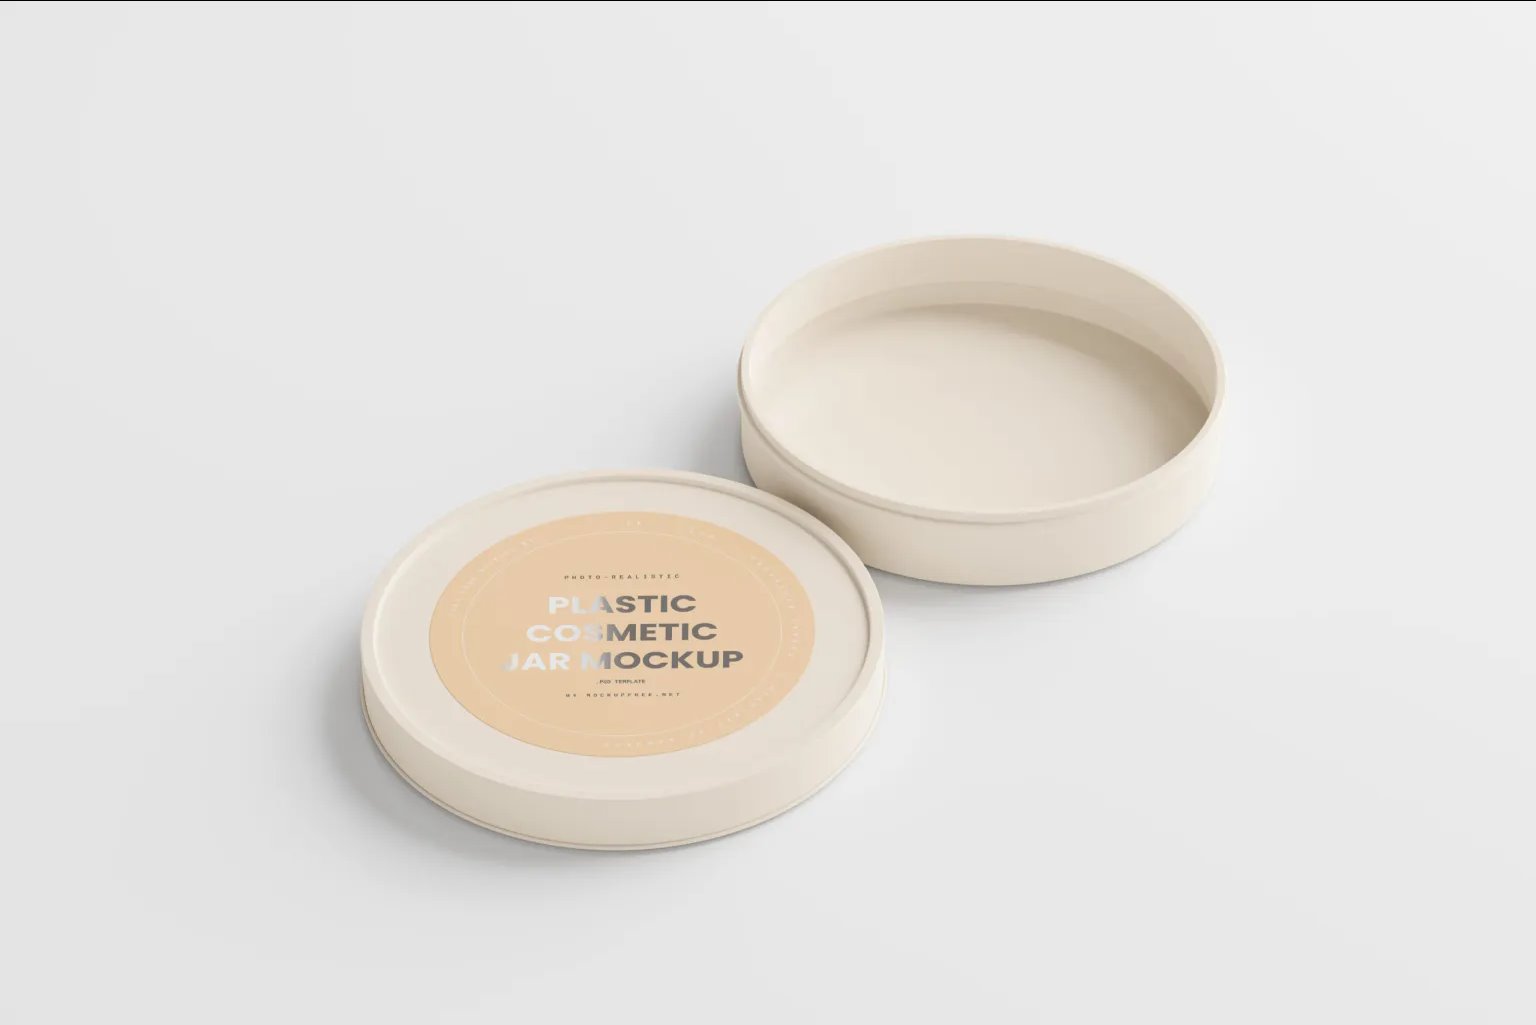 10 Mockups of Flat Plastic Cosmetic Jar with Label FREE PSD